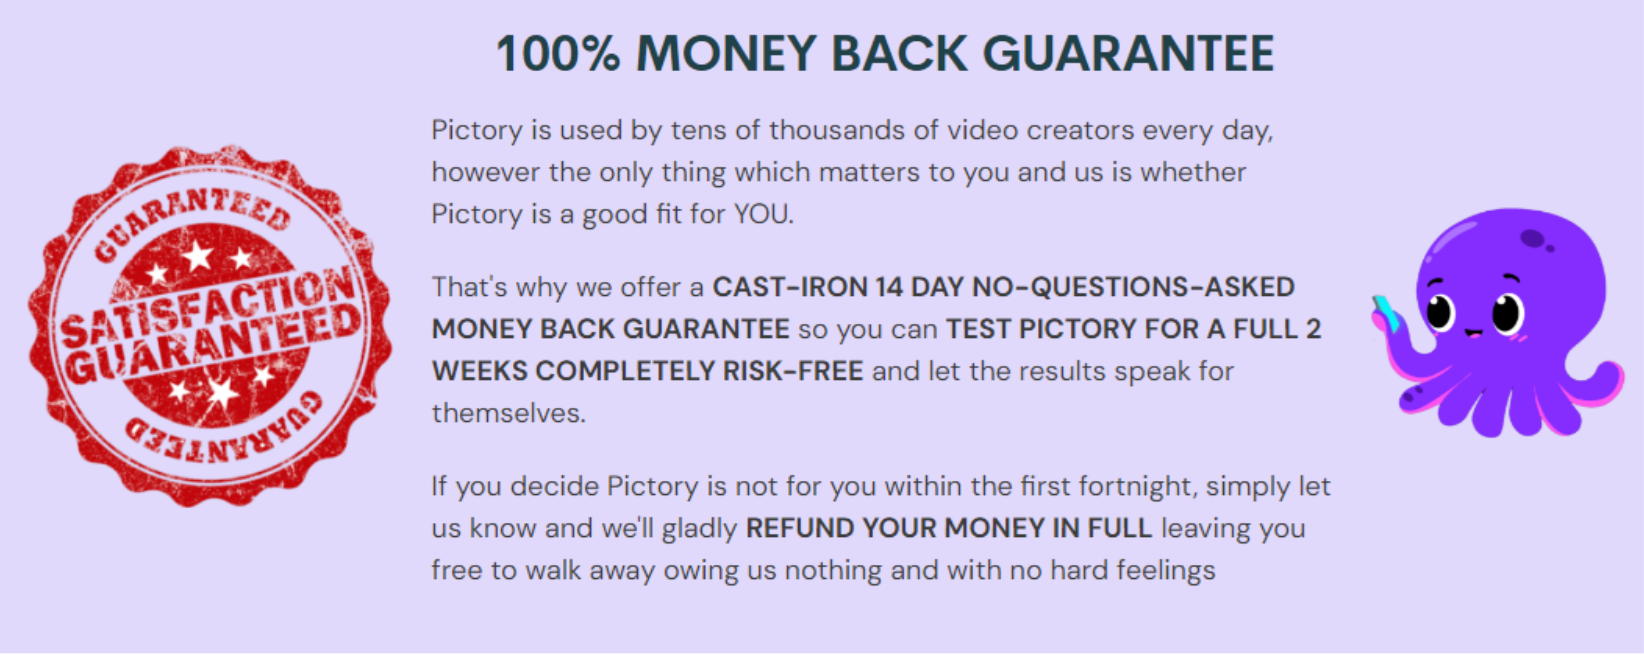 Image of money back guarantee for Pictory.ai